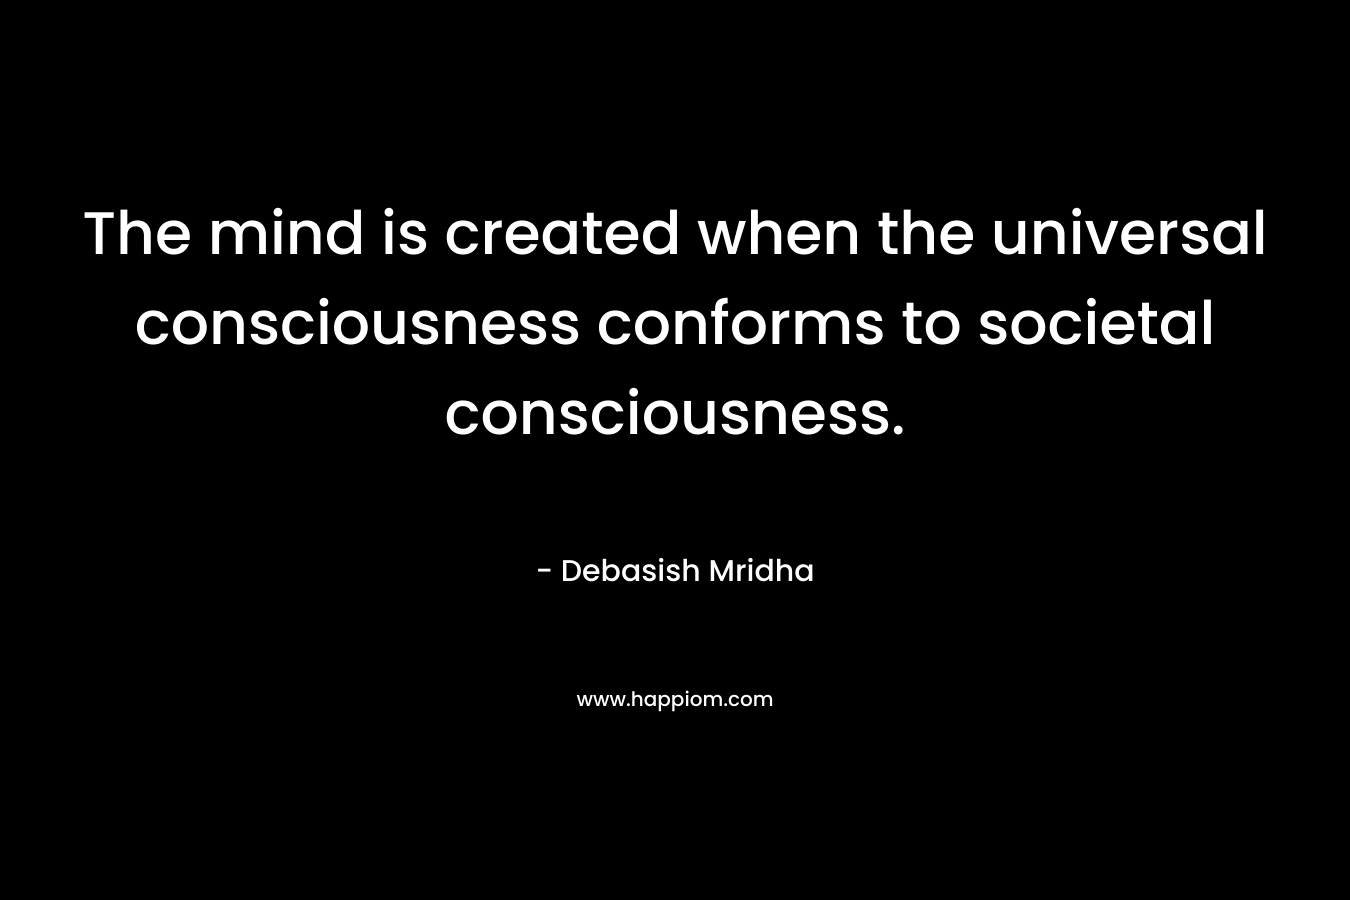 The mind is created when the universal consciousness conforms to societal consciousness.